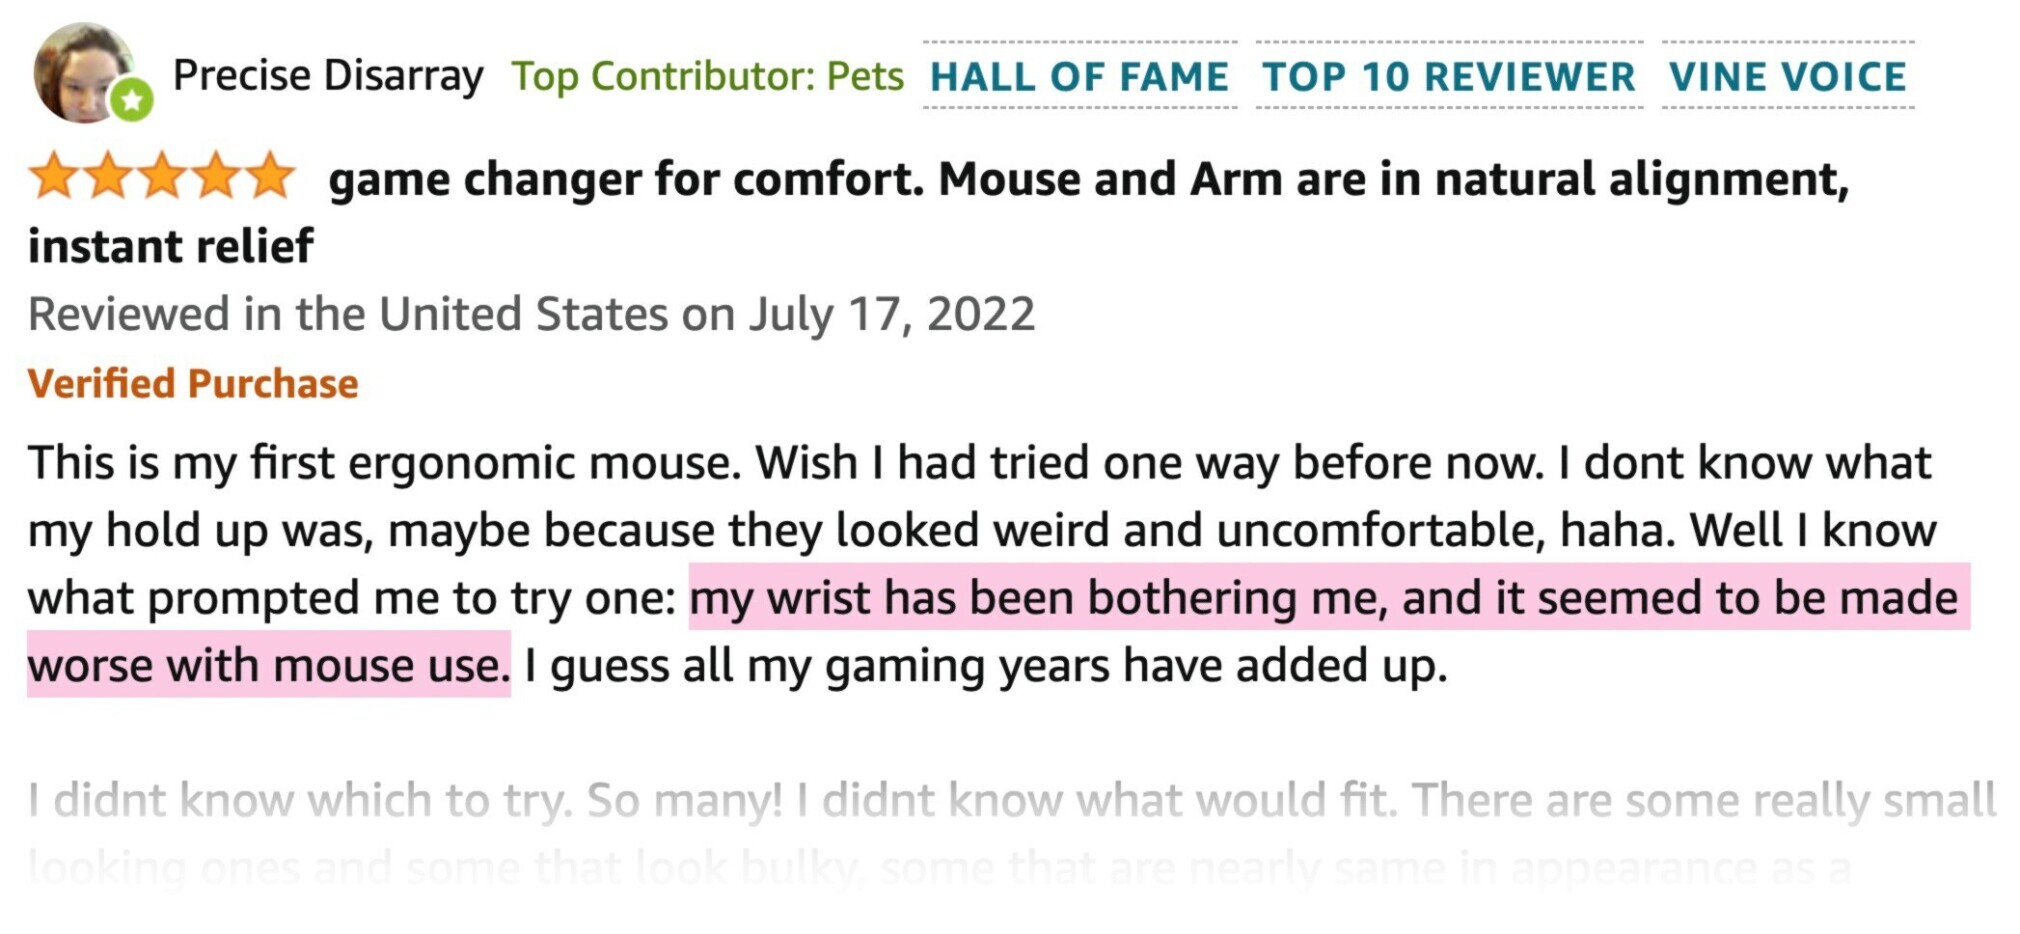 Amazon review with the words "my wrist has been bothering me, and it seemed to be made worse with mouse use" highlighted